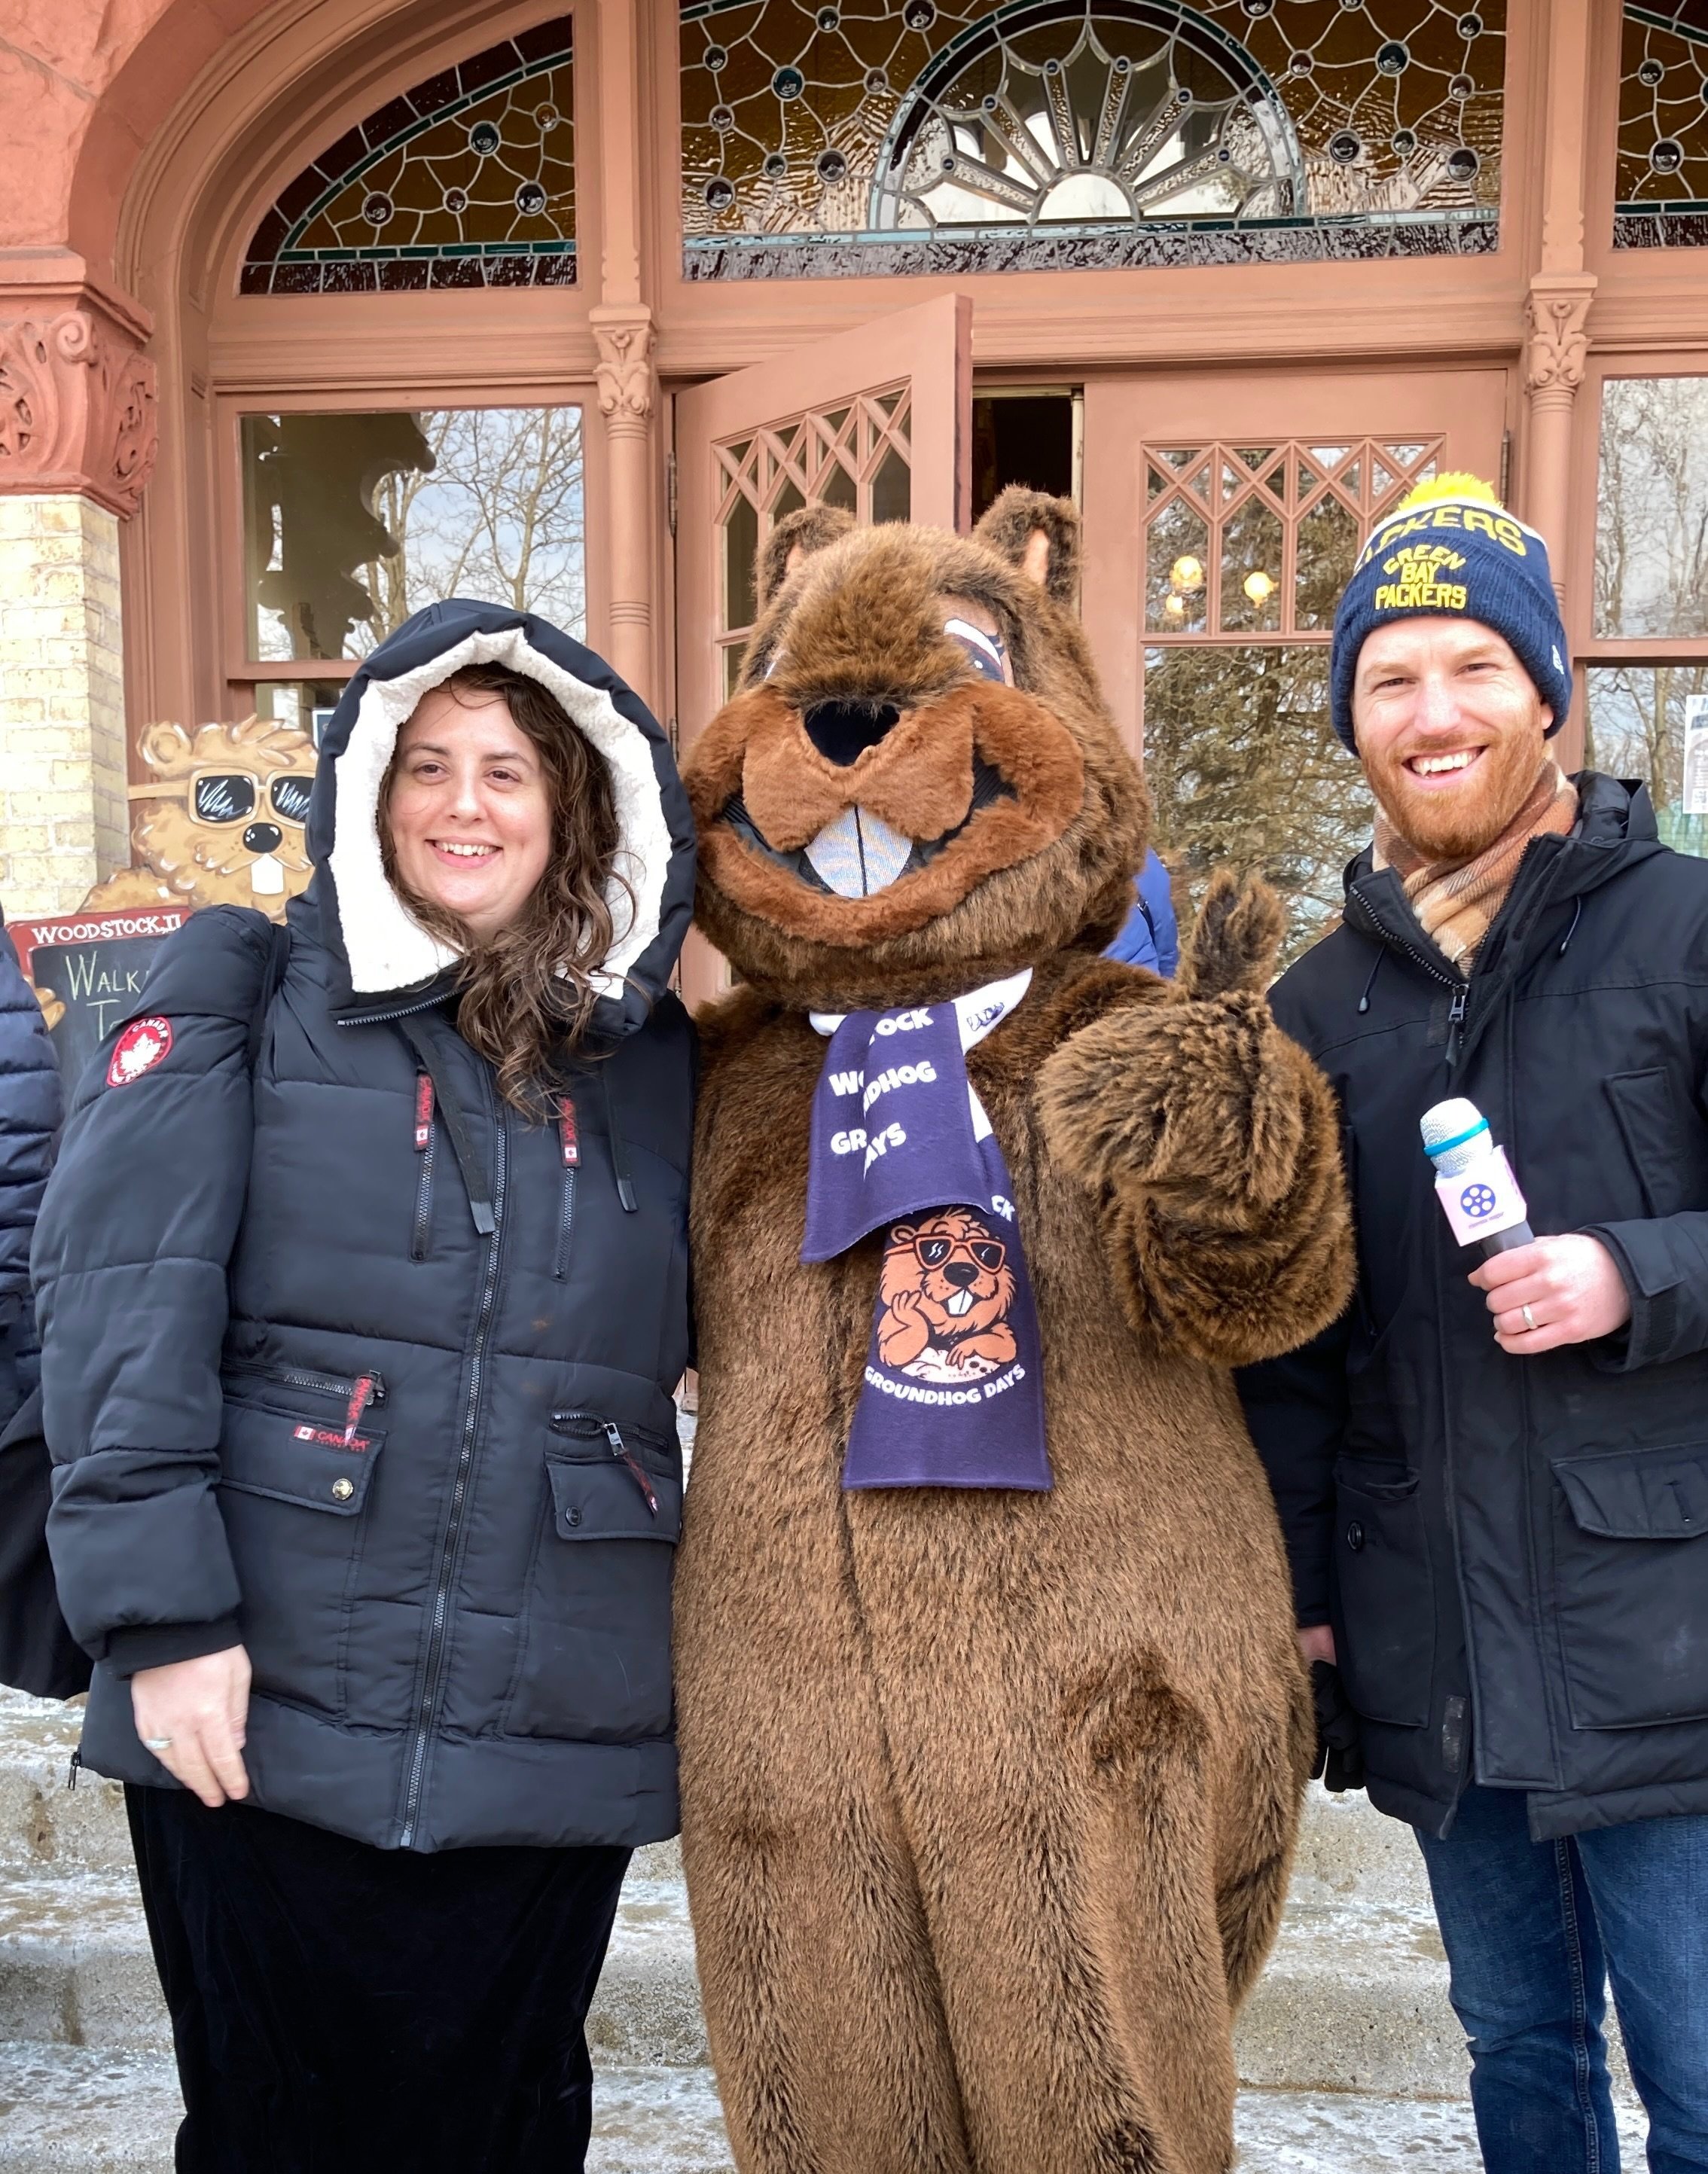  Cinema Sugar’s Natalie Bauer and Chad Comello meet the one and only Woodstock Willie! 